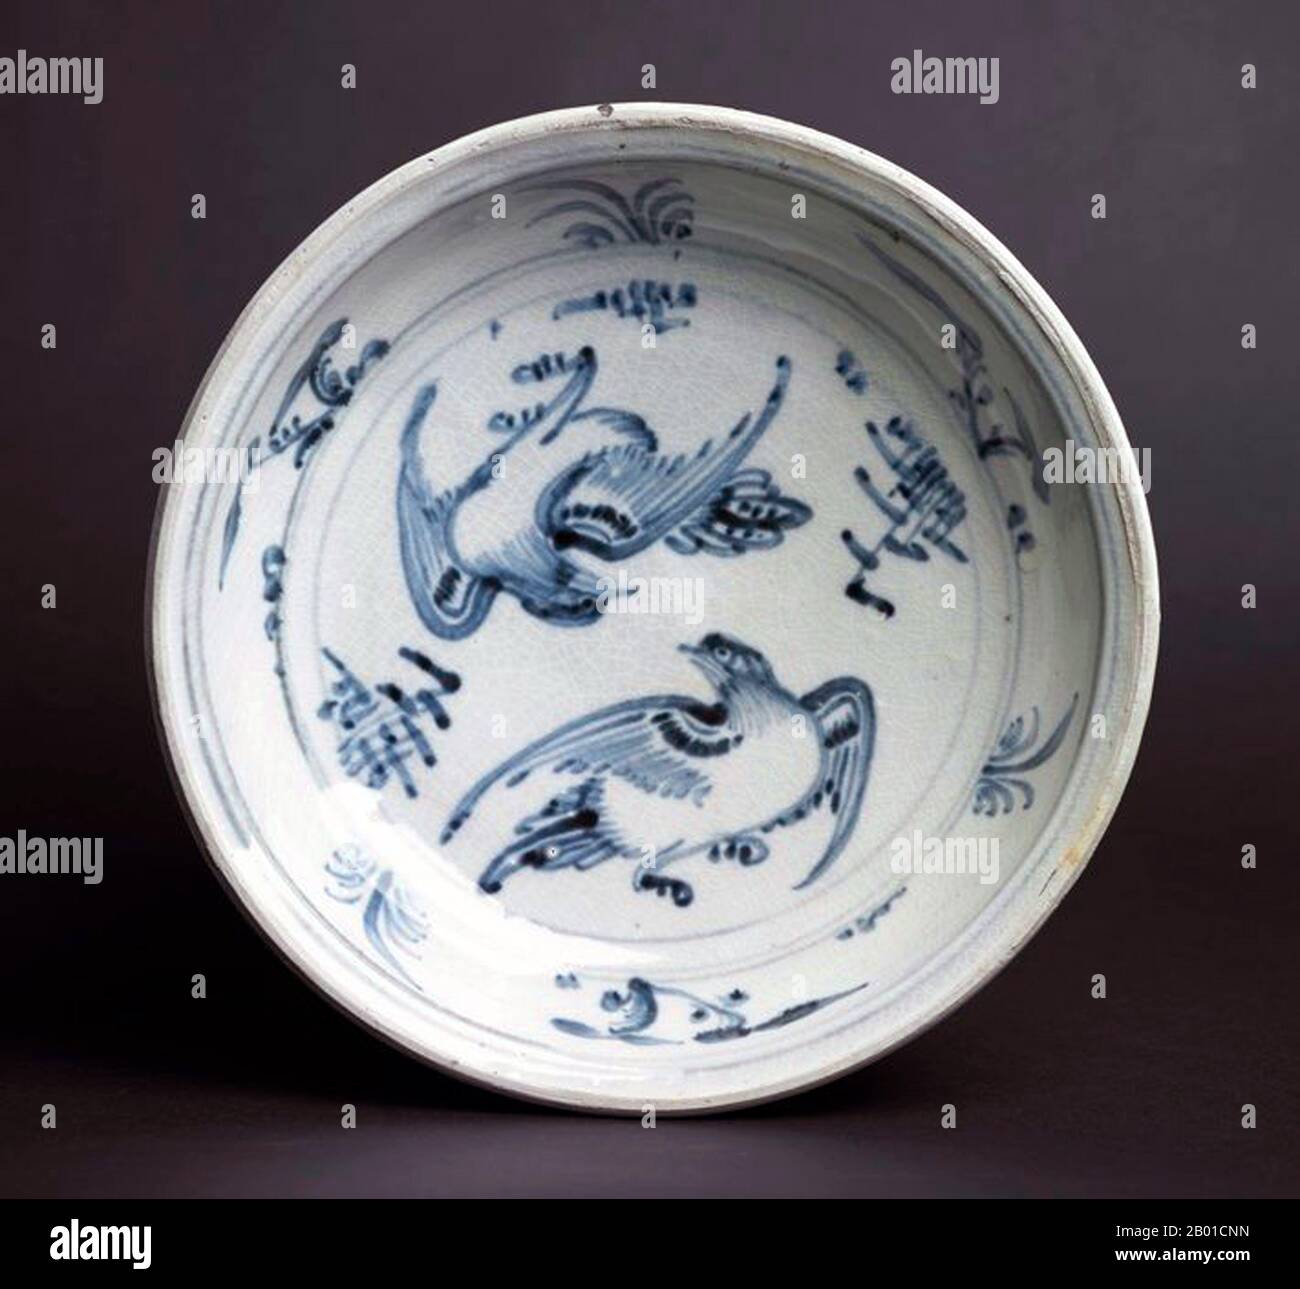 Vietnam: Blue and White plate with two birds flying around each other surrounded by various flora. Later Lê Dynasty (1533-1788).  Bát Tràng porcelain and pottery is a type of ceramics made in the village of Bát Tràng, in the suburban outskirts of the northern Vietnamese city of Hanoi. The village is located in an area rich in clay suitable for making fine ceramics.  Bát Tràng ceramics are considered some of the best known porcelain products in Vietnam besides those of Chu Đậu, Đồng Nai, Phu Lang, and Ninh Thuận. Stock Photo